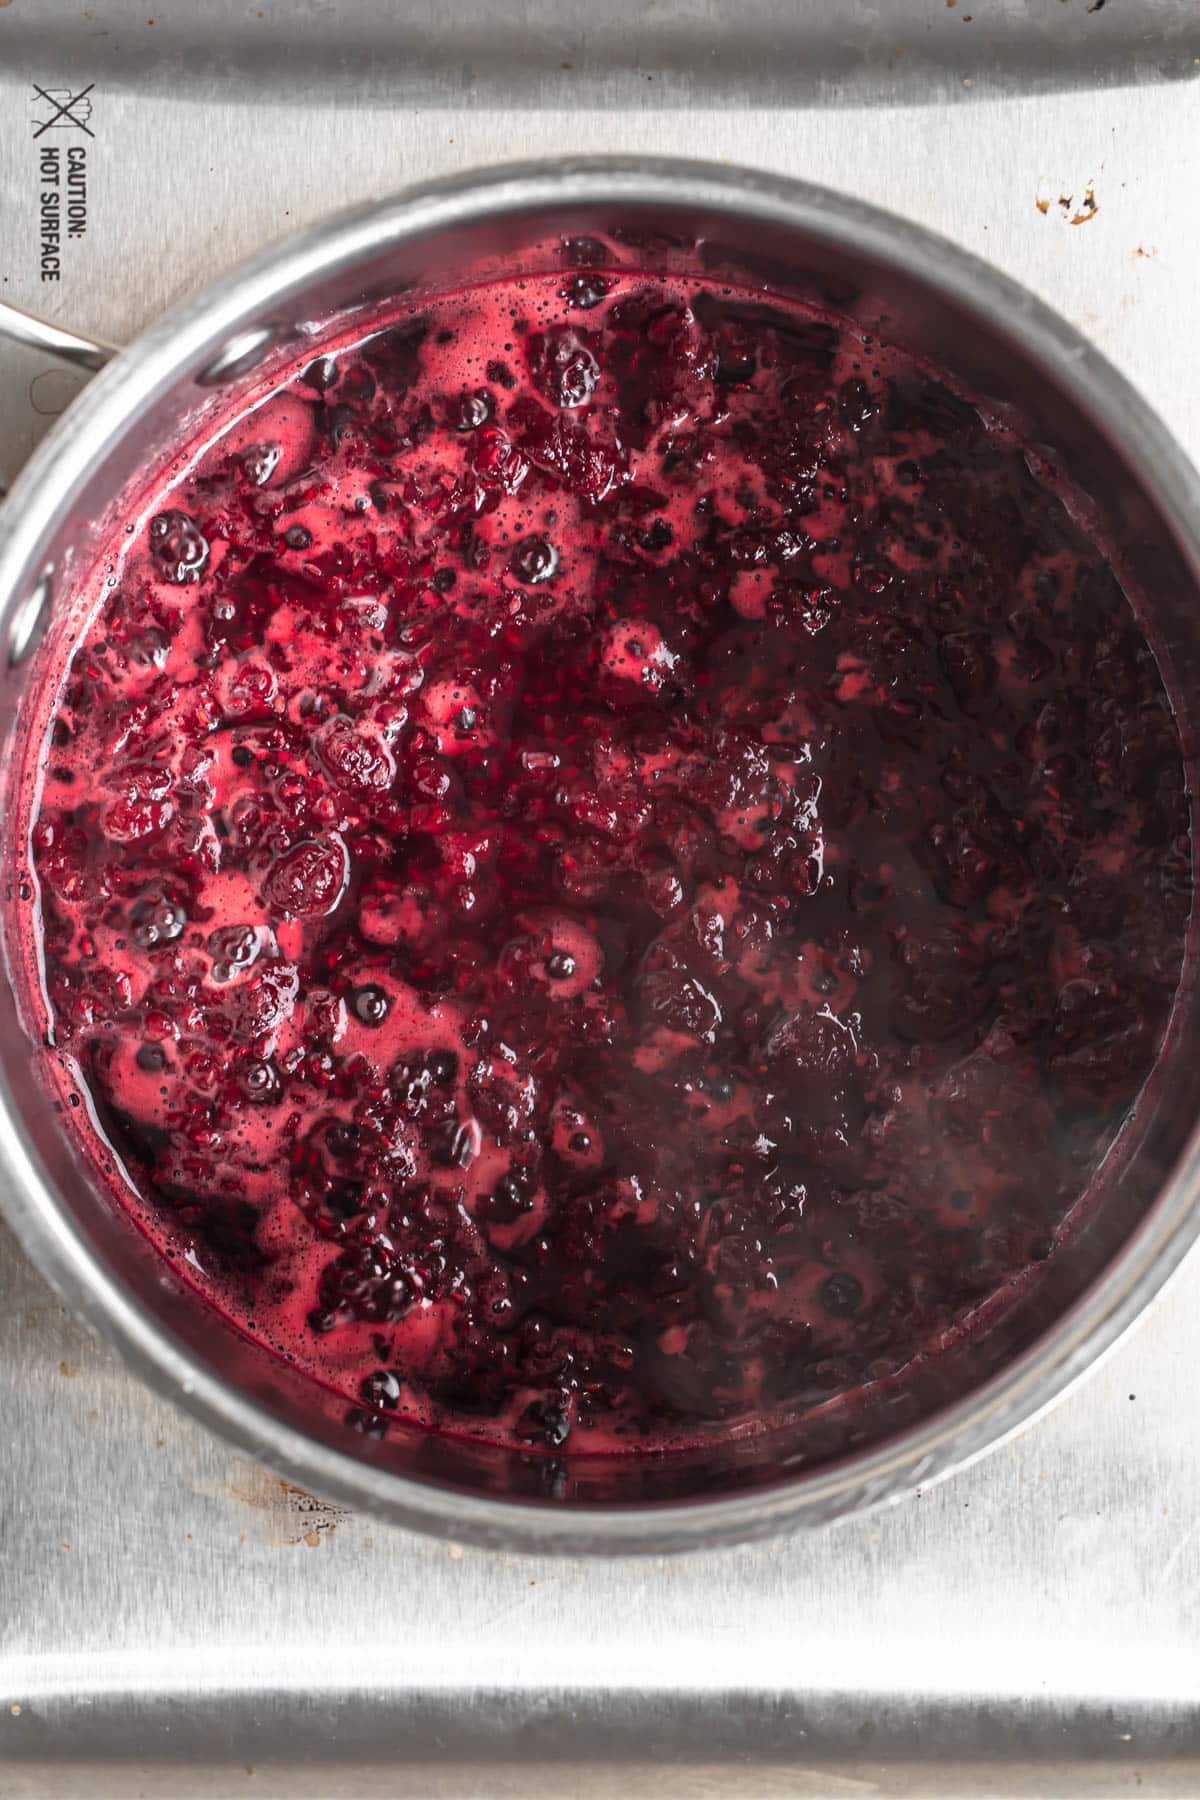 Raspberry compote simmering in a saucepan.